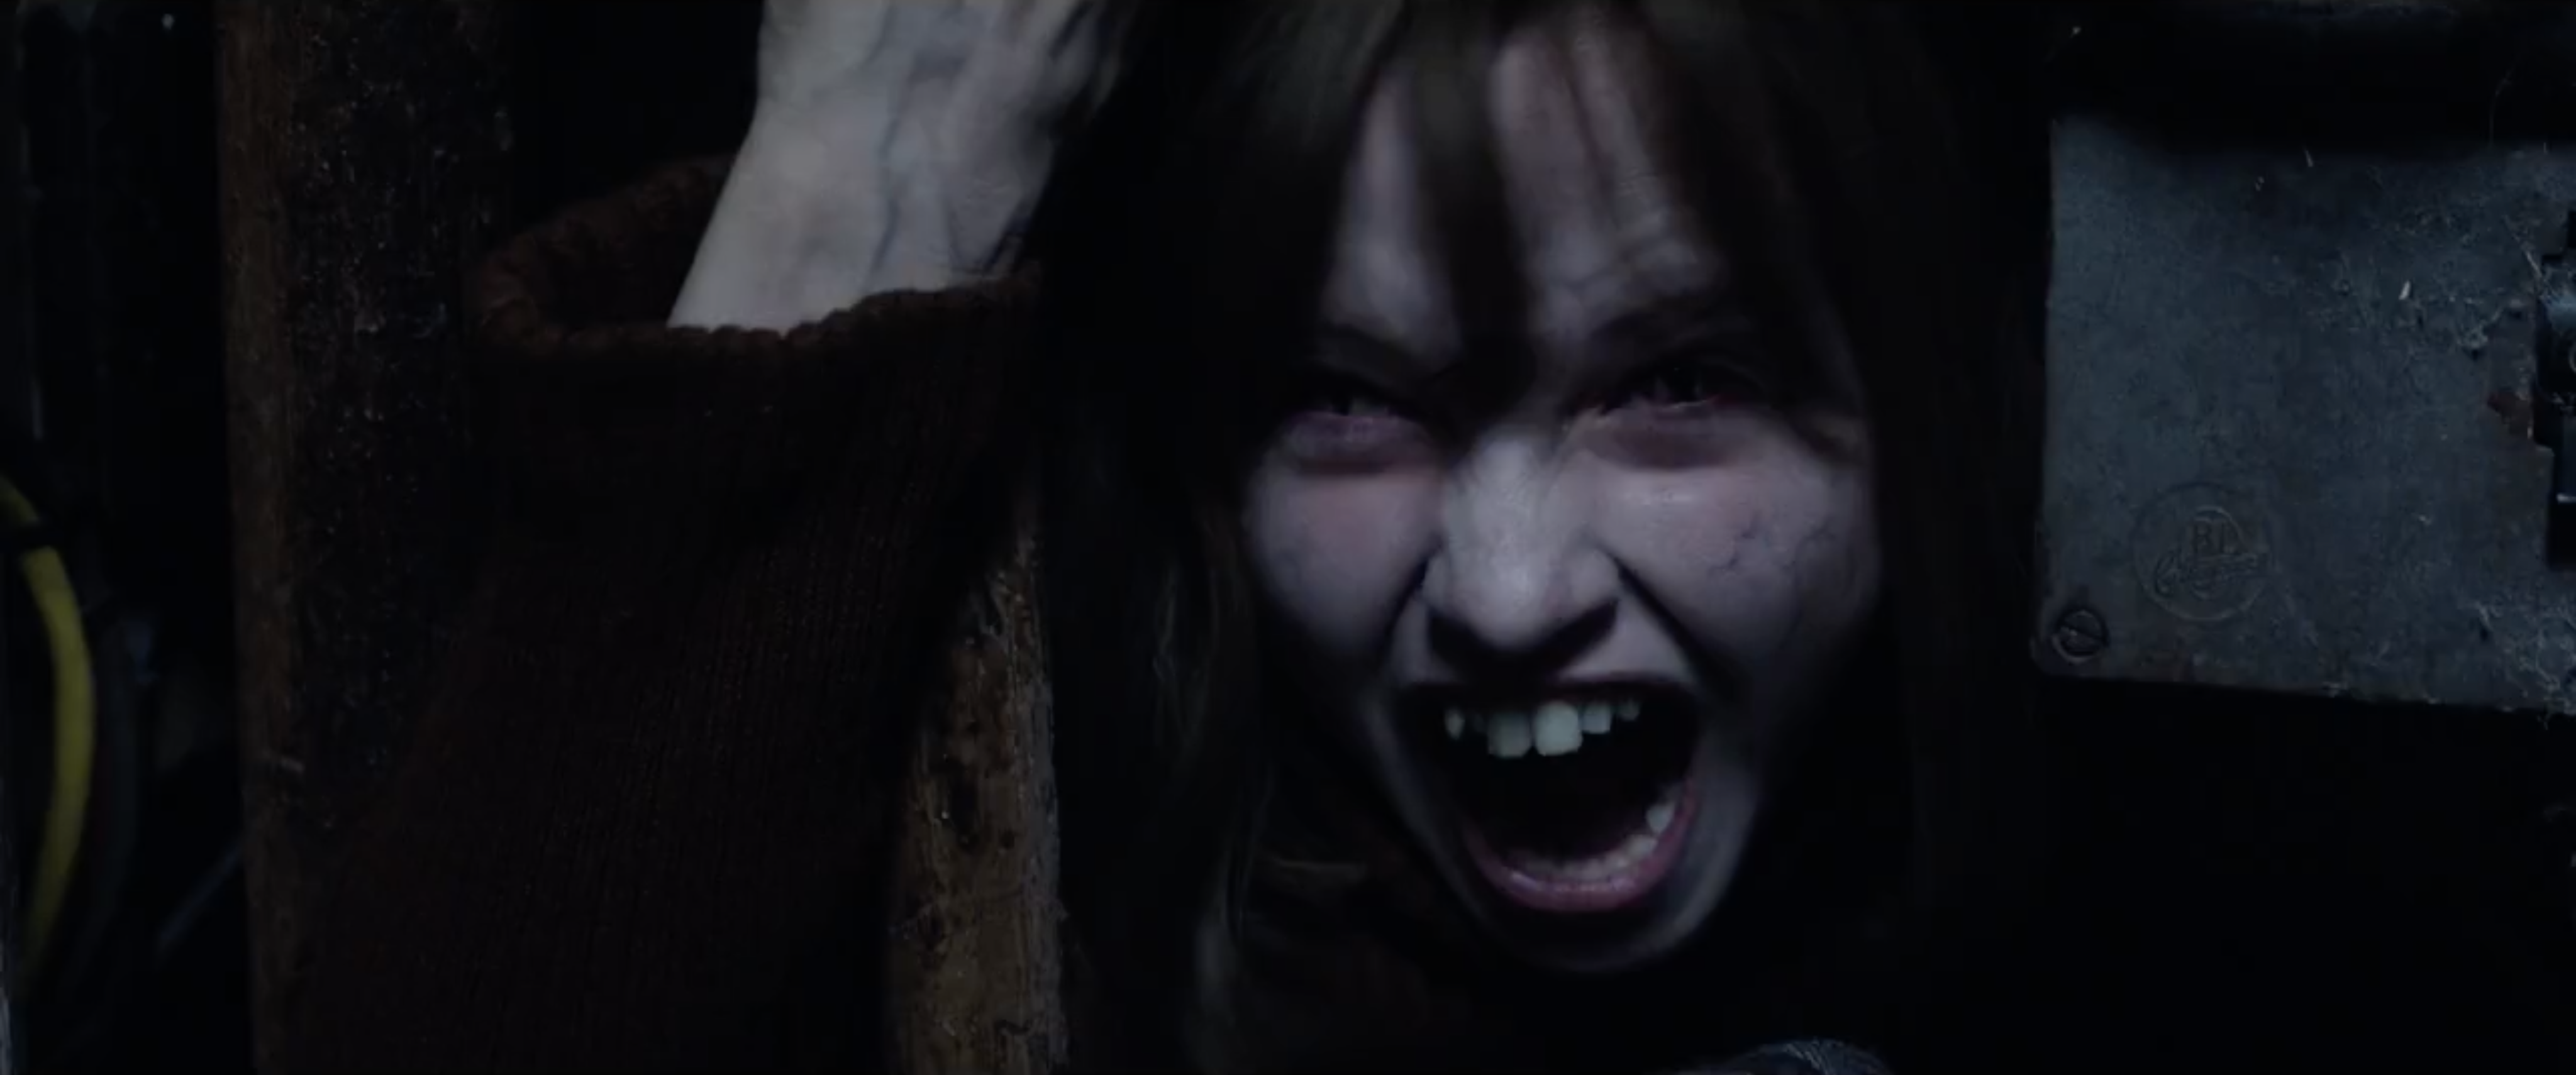 Joseph Bisharas The Conjuring 2 Score Now Available Bloody